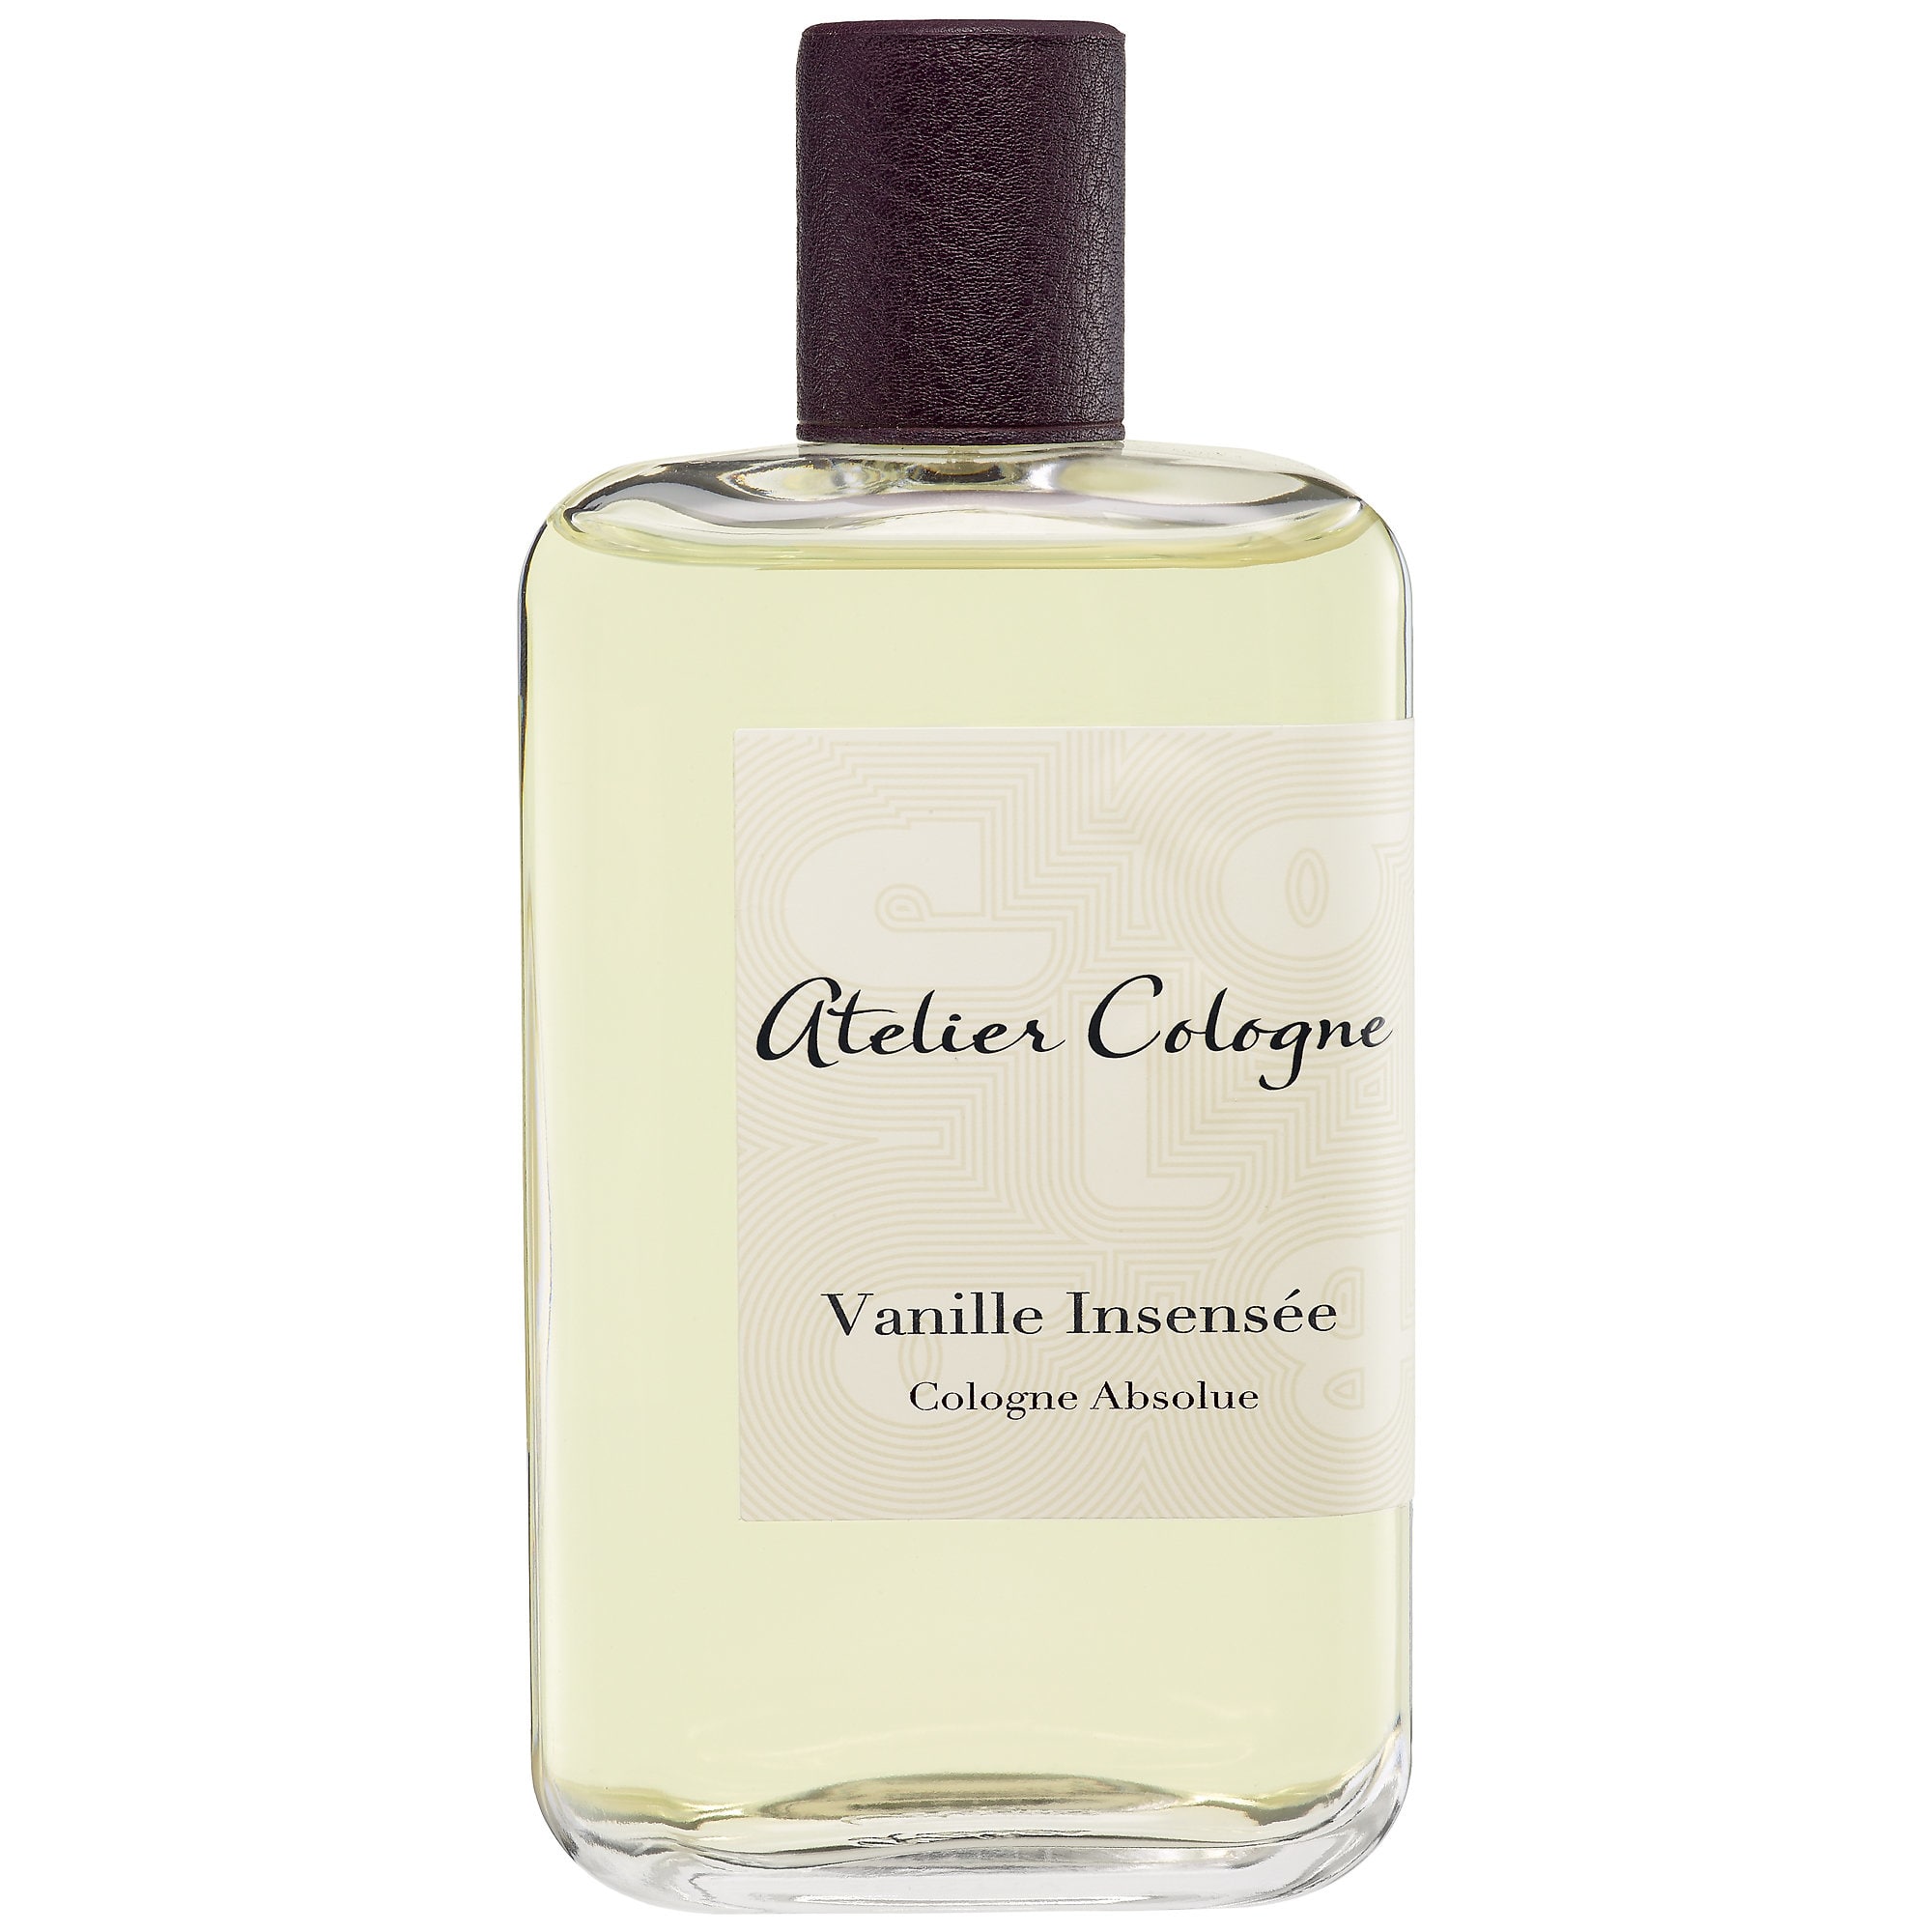 ATELIER COLOGNE VANILLE INSENSEE